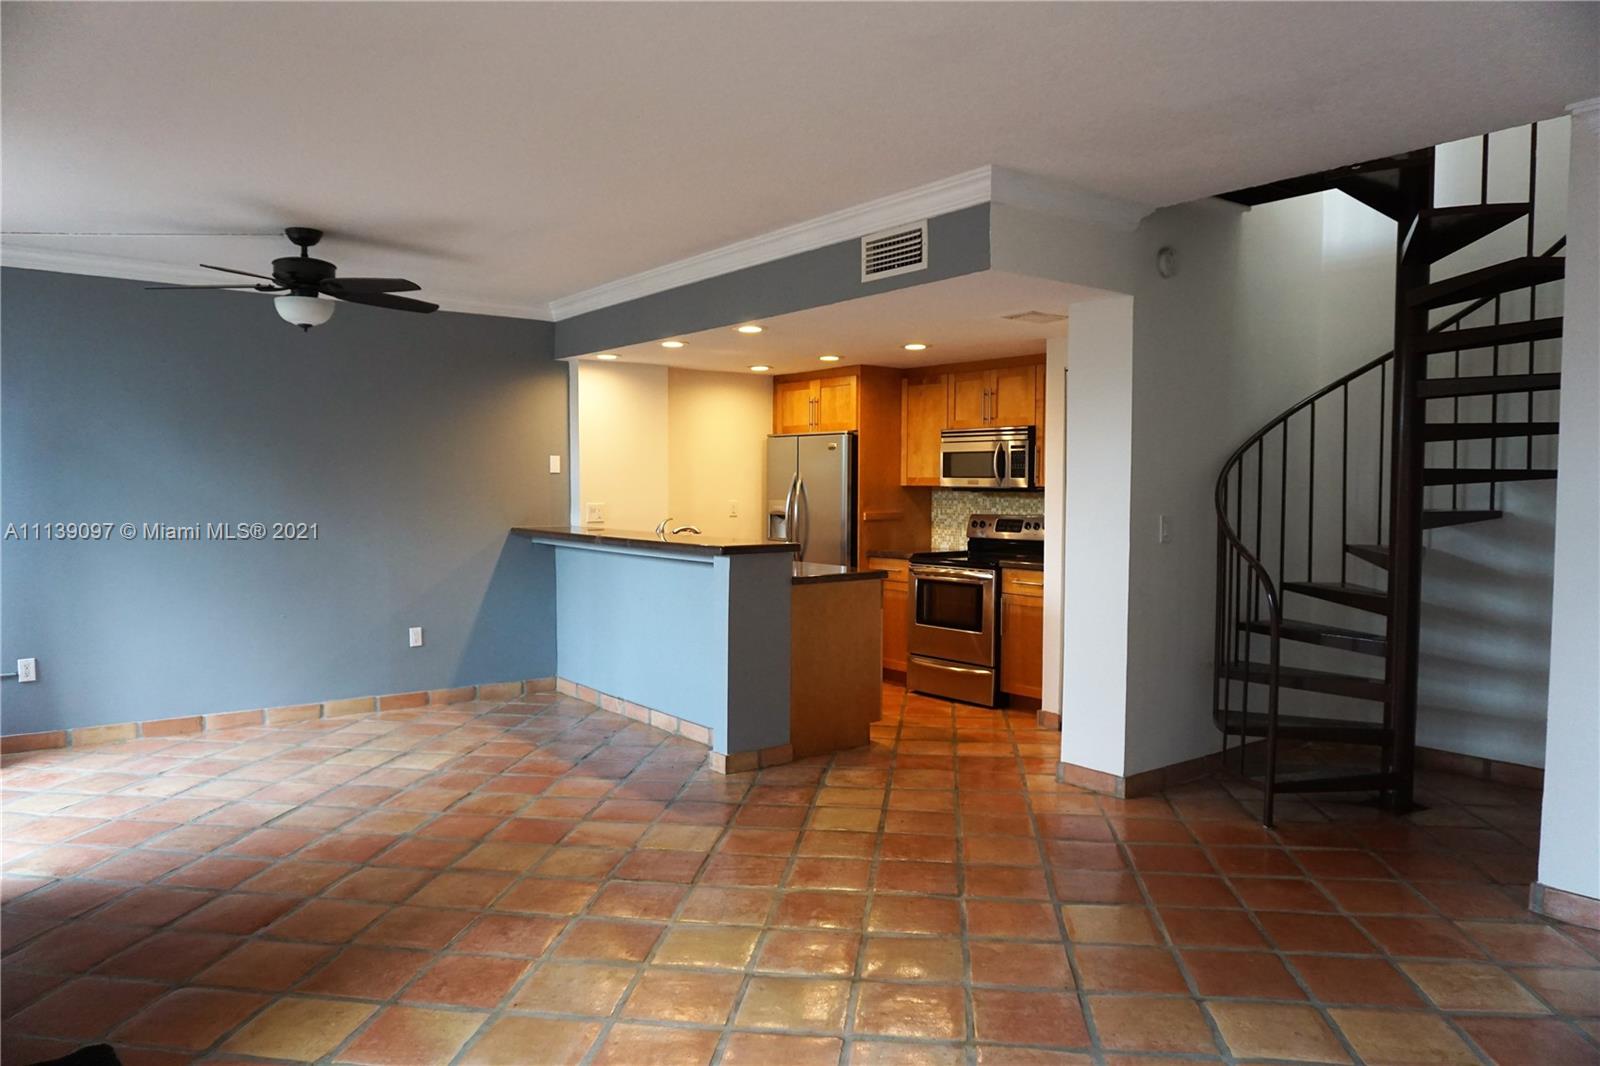 Super nice and perfectly maintained 2 bedroom condo in great a Coconut Grove location.  Each room has full length sliding doors giving it a very open and bright feel.  There is a huge, beautifully decorated patio.  You'll love the well laid out, recently redone kitchen with wood cabinets, granite countertops and stainless appliances.  This home is truly move in ready.  You will be walking distance to all the great spots in the Grove and about a block from US-1.  Your next to public transportation and close to the Gables, Brickell and Coconut Grove.  The community is gated and there is a pool next to your unit.